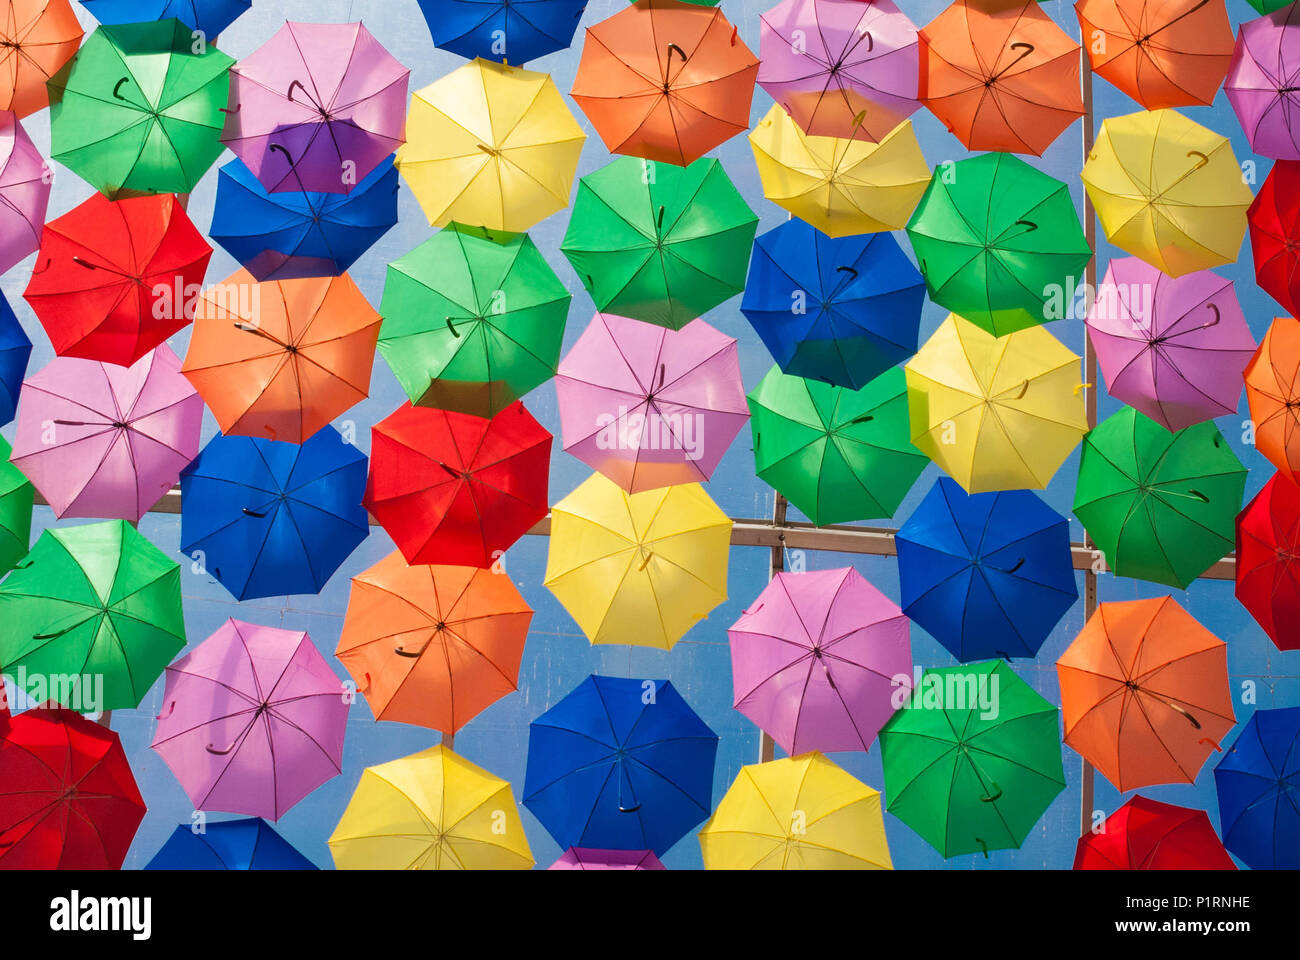 Colourful umbrellas in the street Stock Photo